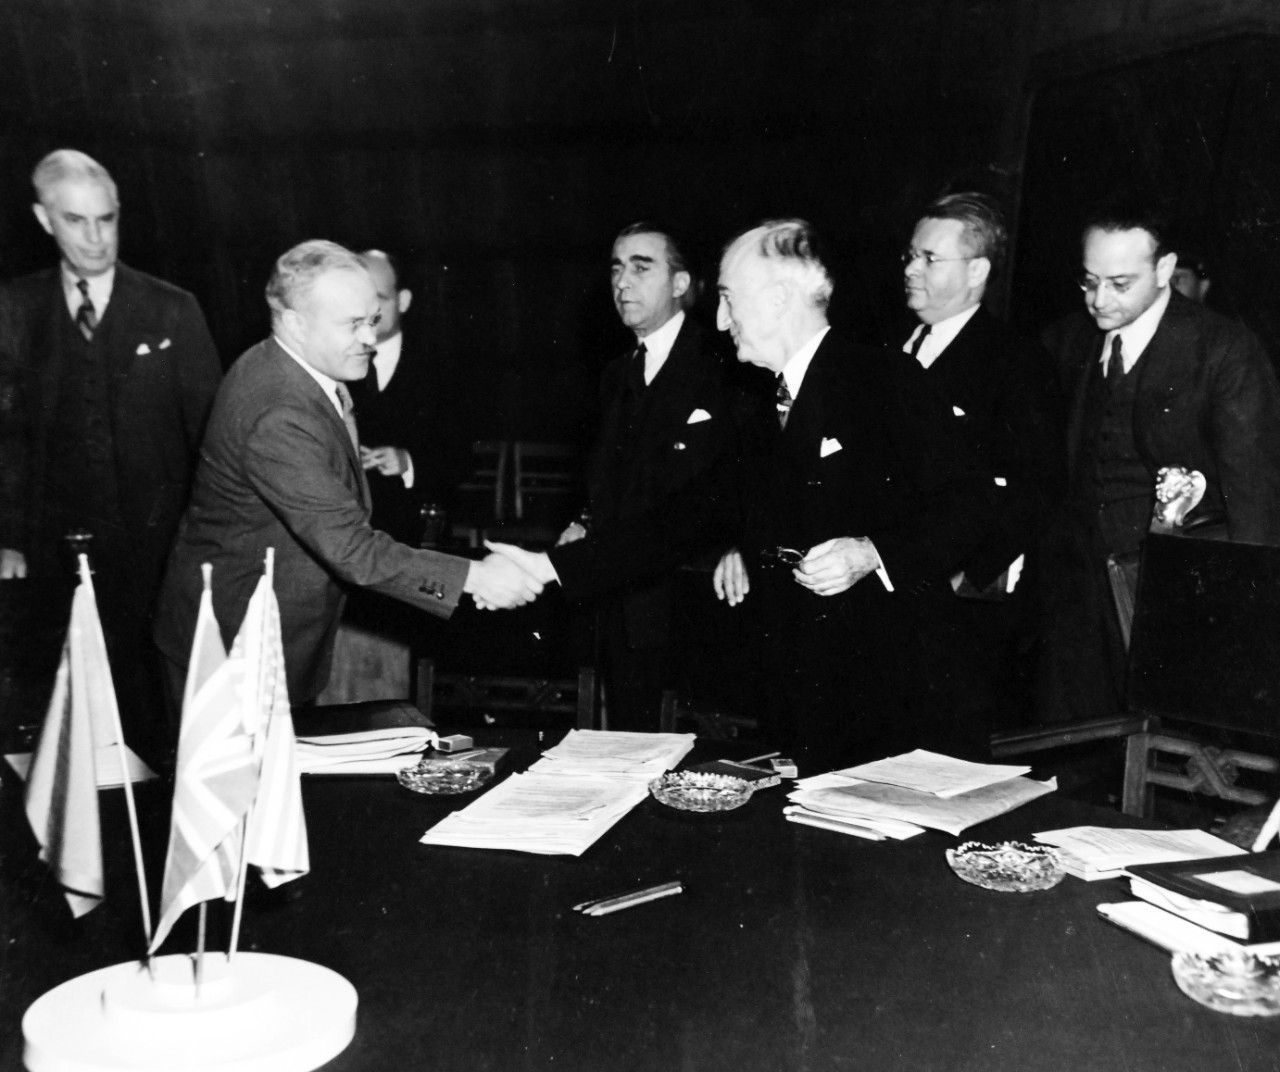 80-G-700119: Potsdam Conference, July-August 1945. The “Little Three” (Foreign Ministers) meeting in the same conference room as the Heads of States at Potsdam, Germany.  Foreign Commissar V. Molotov being greeted by Secretary of State James F. Byrnes prior to opening.  Photographed released July 24, 1945.  Official U.S. Navy Photograph, now in the collections of the National Archives.  (2016/02/23).